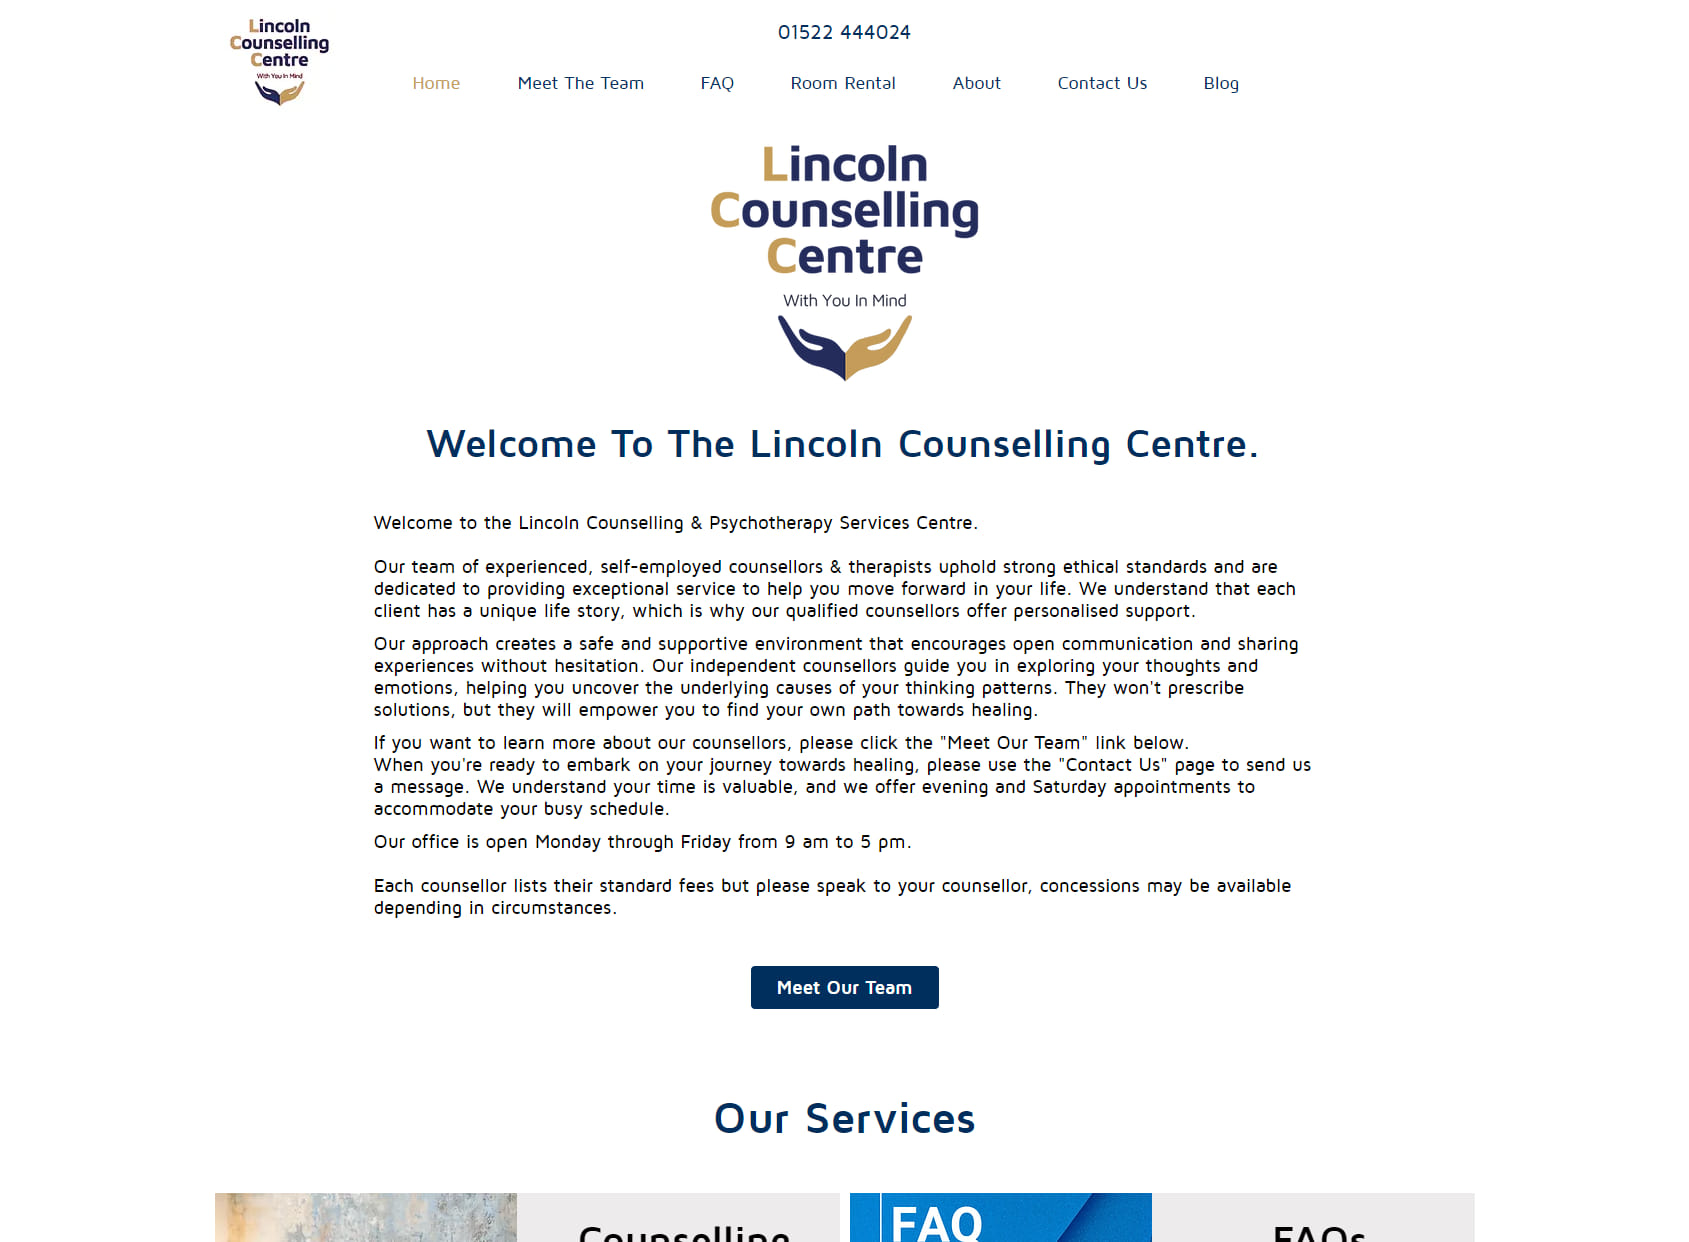 Lincoln Counselling Centre